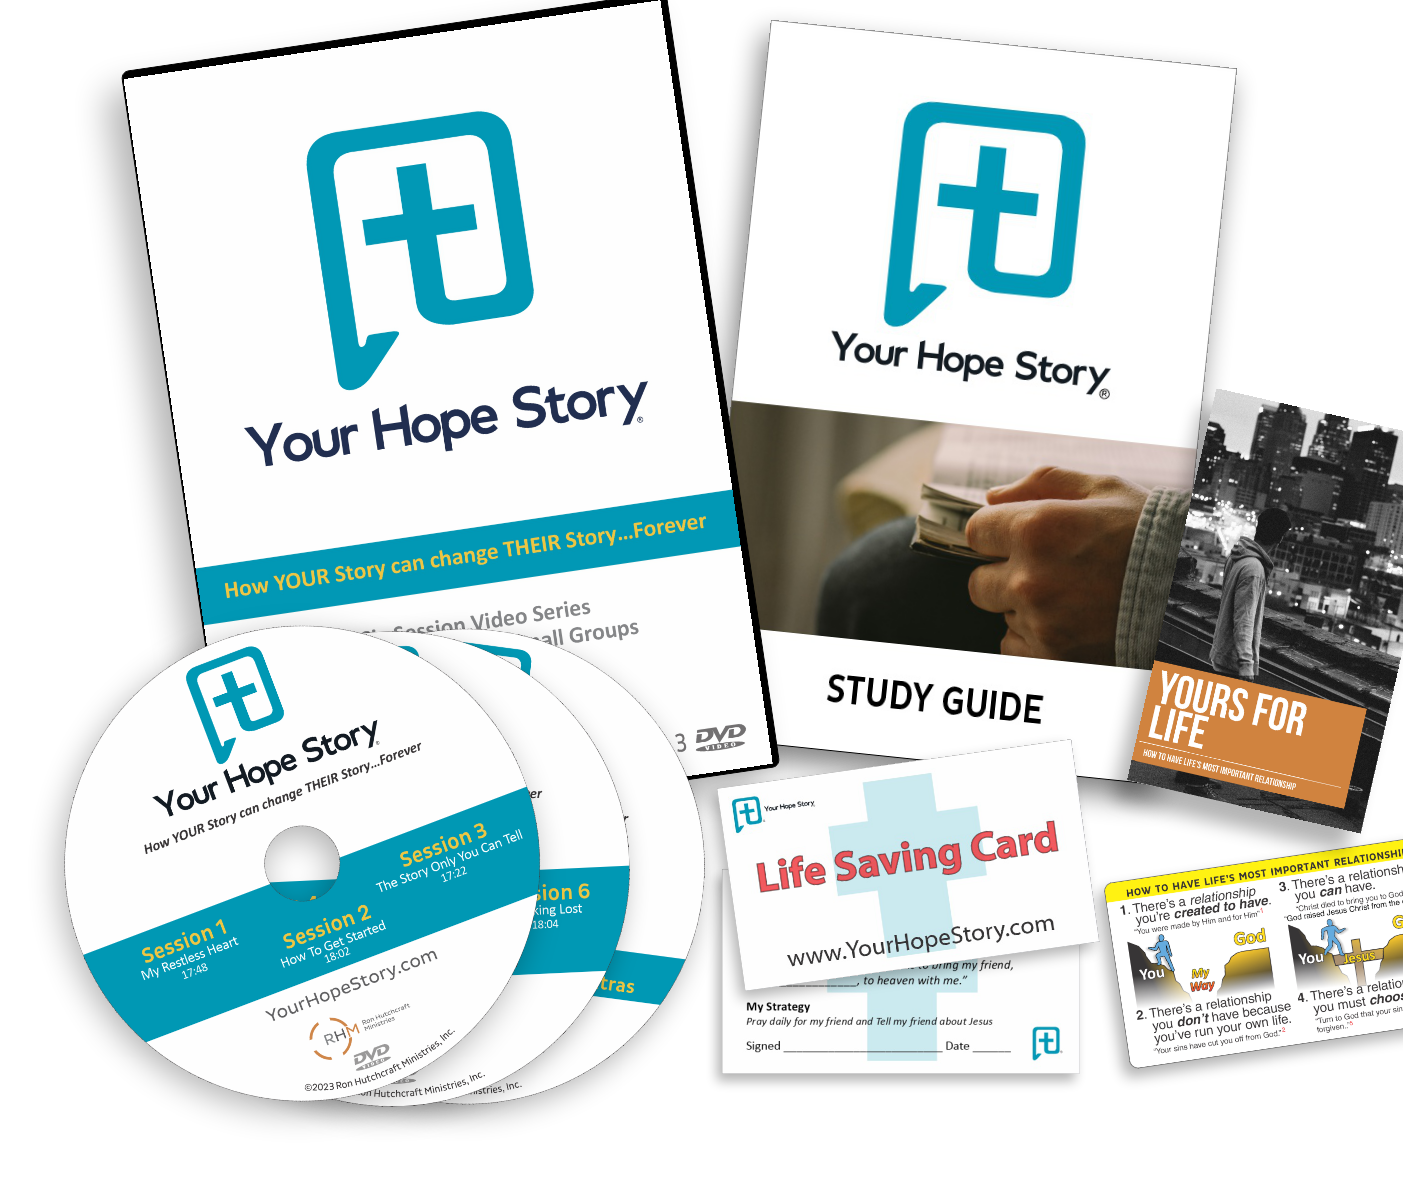 Your Hope Story Video Series